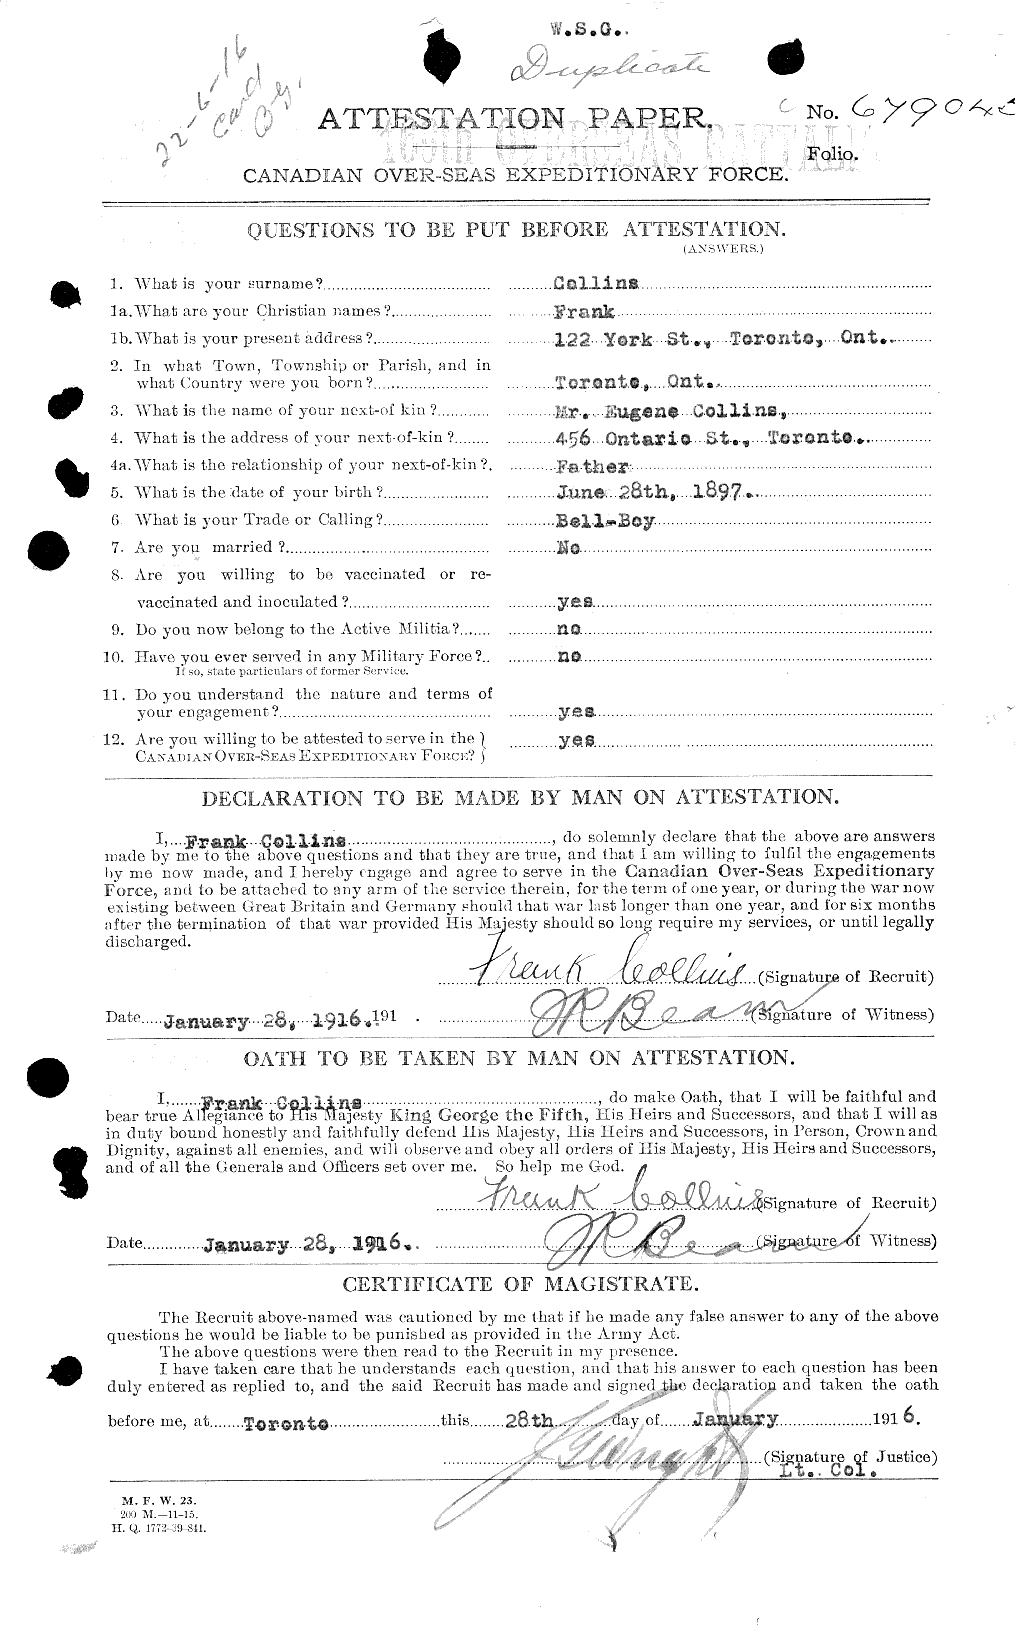 Personnel Records of the First World War - CEF 037791a